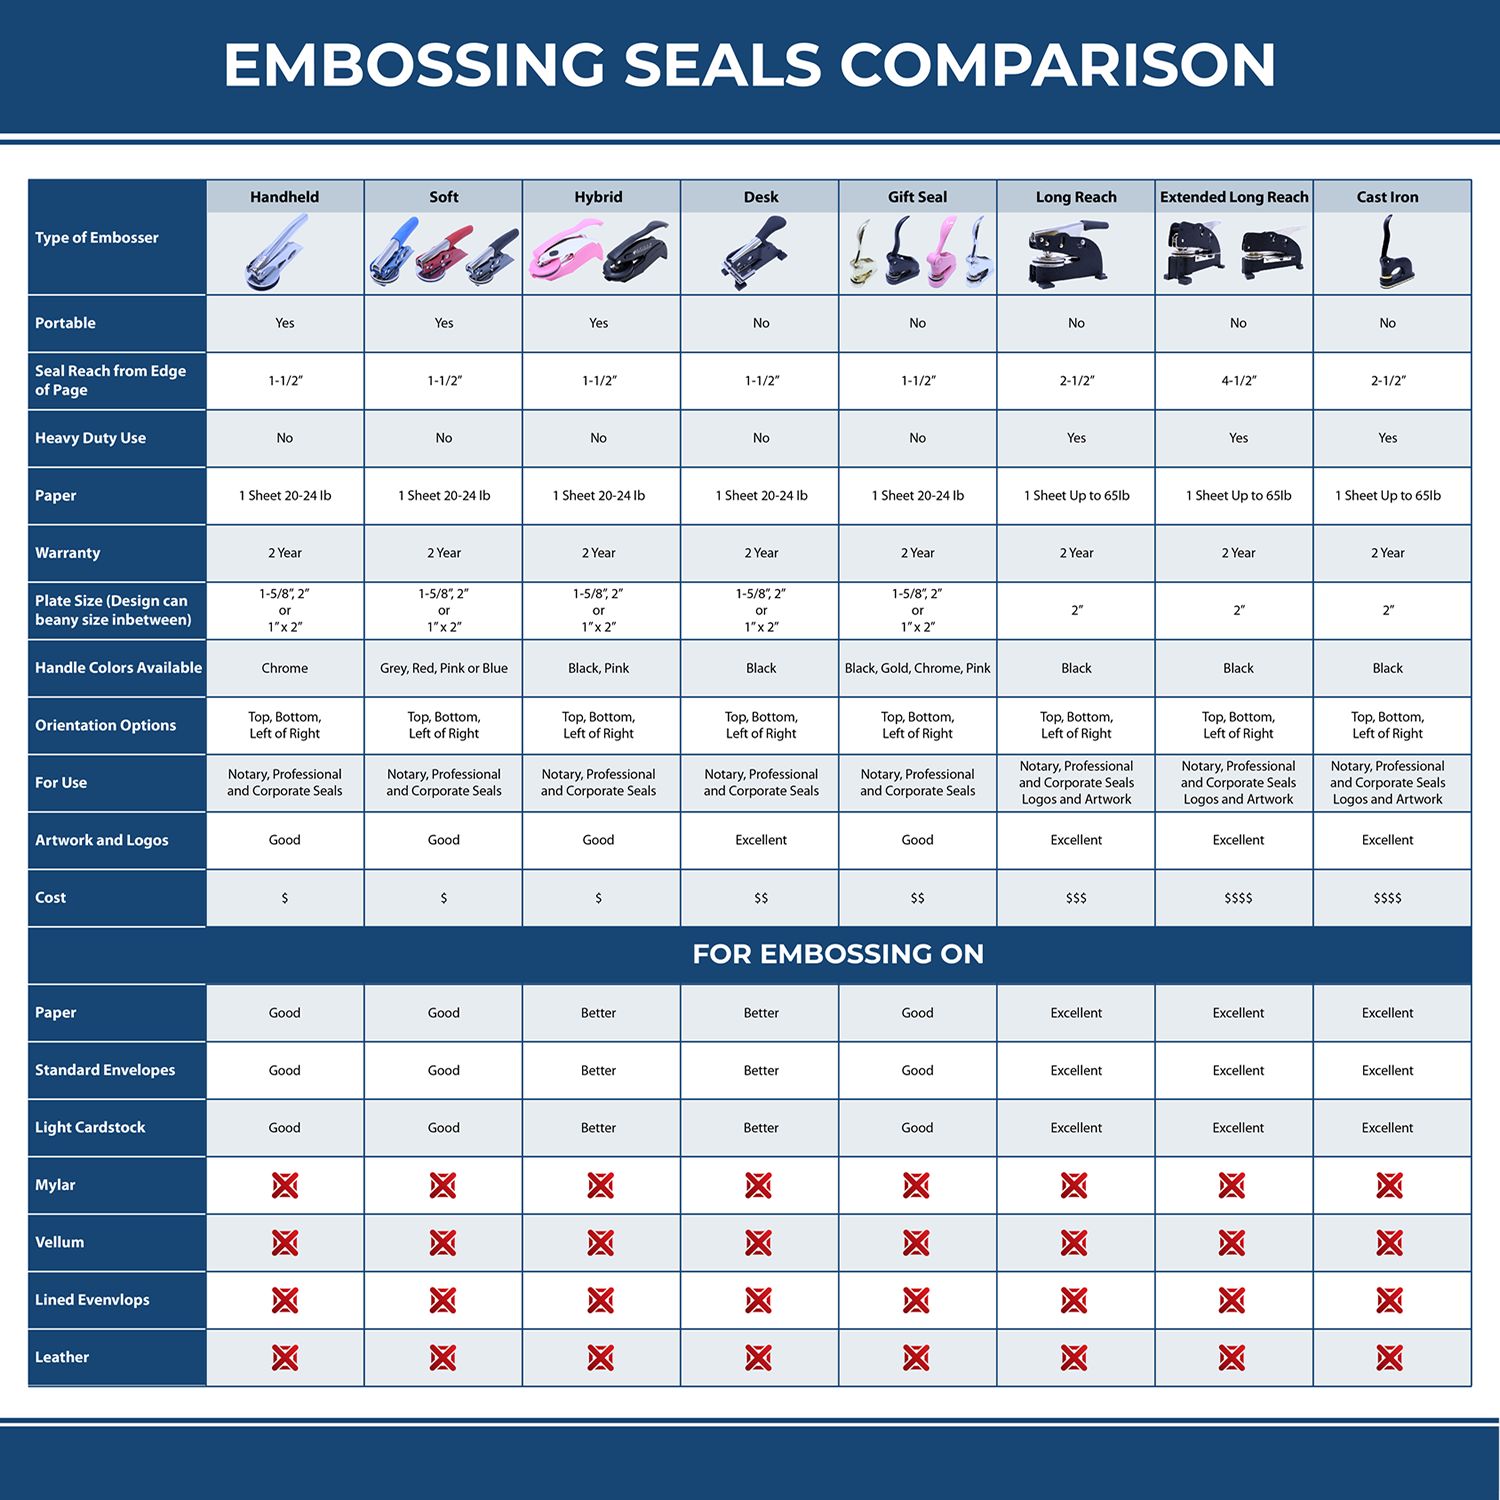 A comparison chart for the different types of mount models available for the Heavy Duty Cast Iron New York Land Surveyor Seal Embosser.